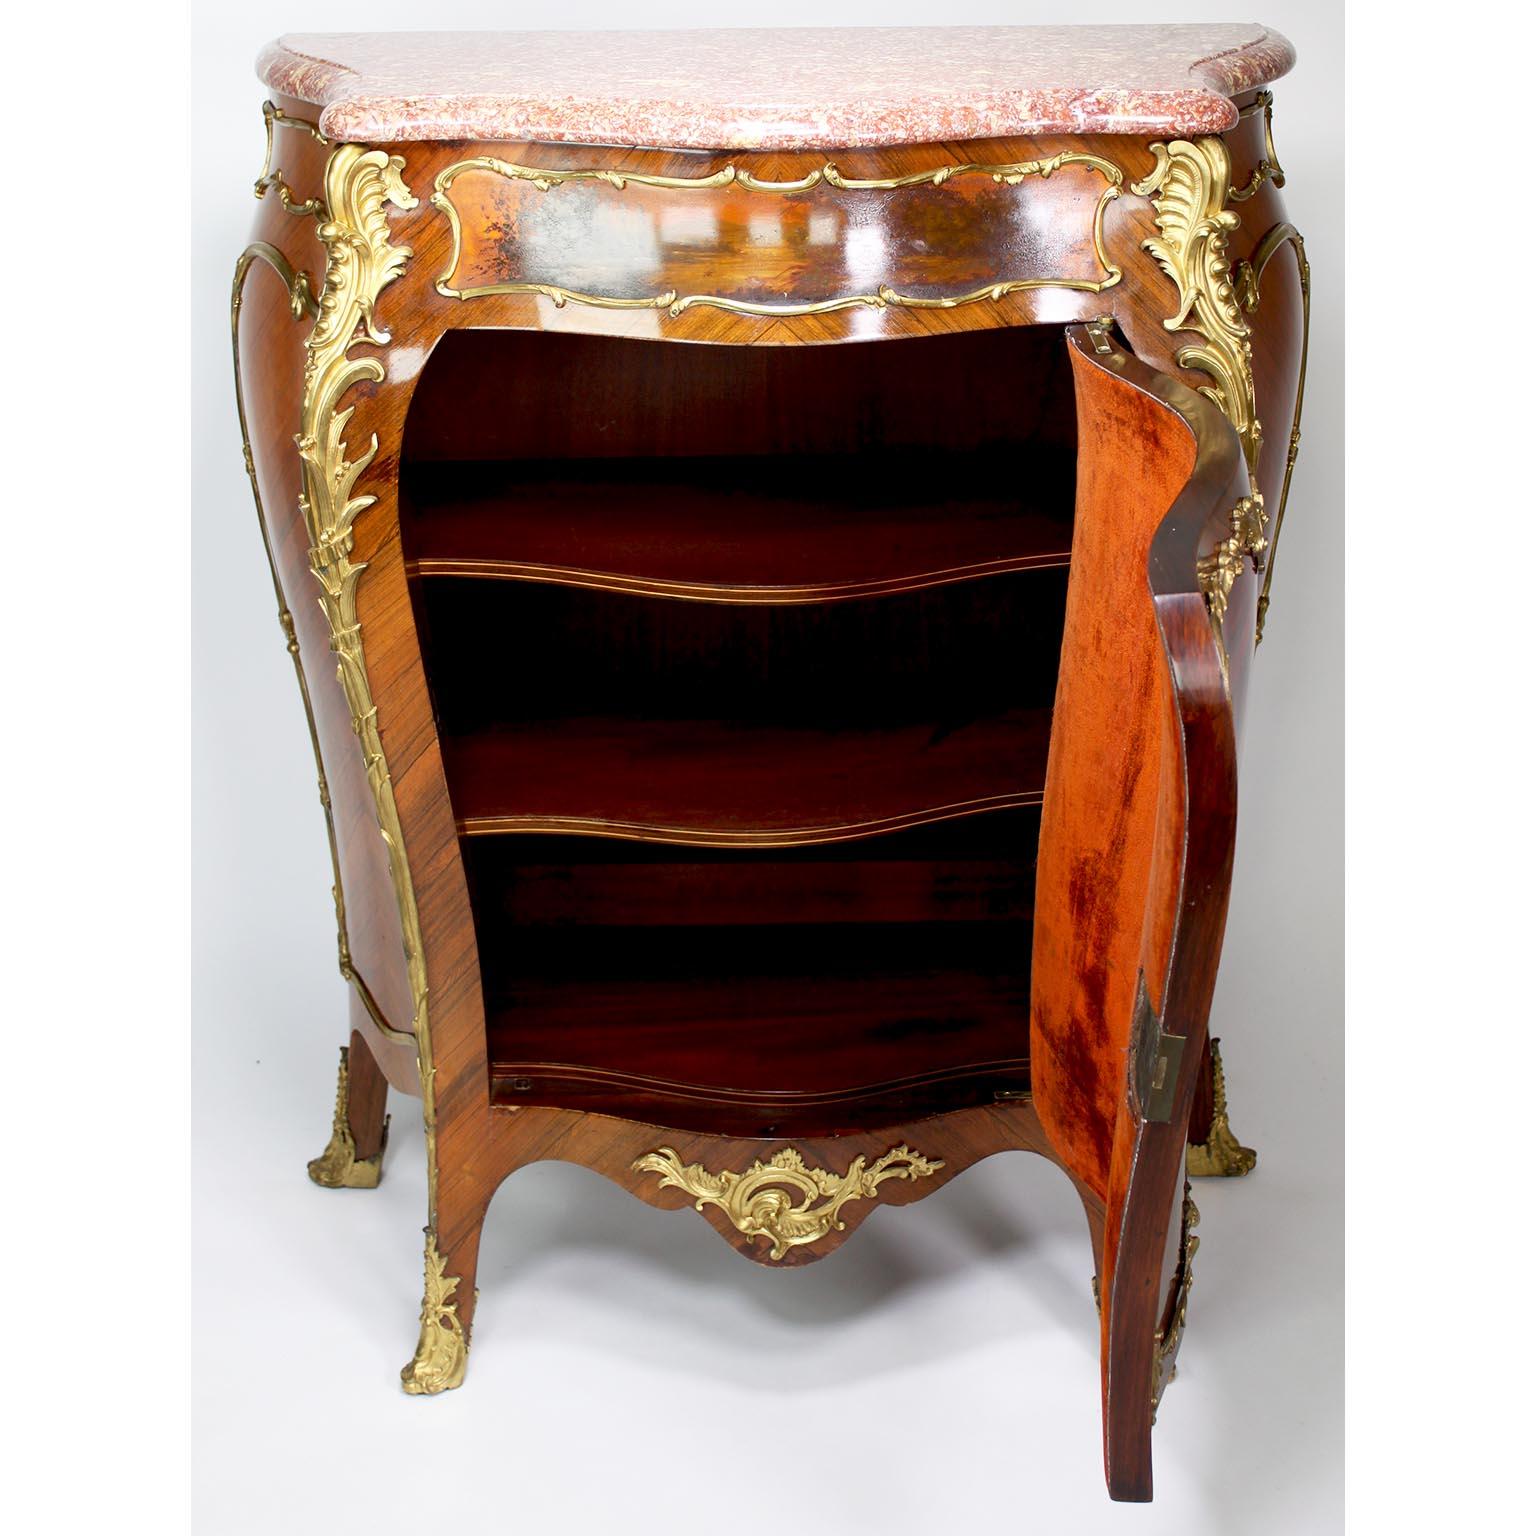 French 19th Century Louis XV Style Ormolu Mounted Kingwood Vernis-Martin Cabinet For Sale 4